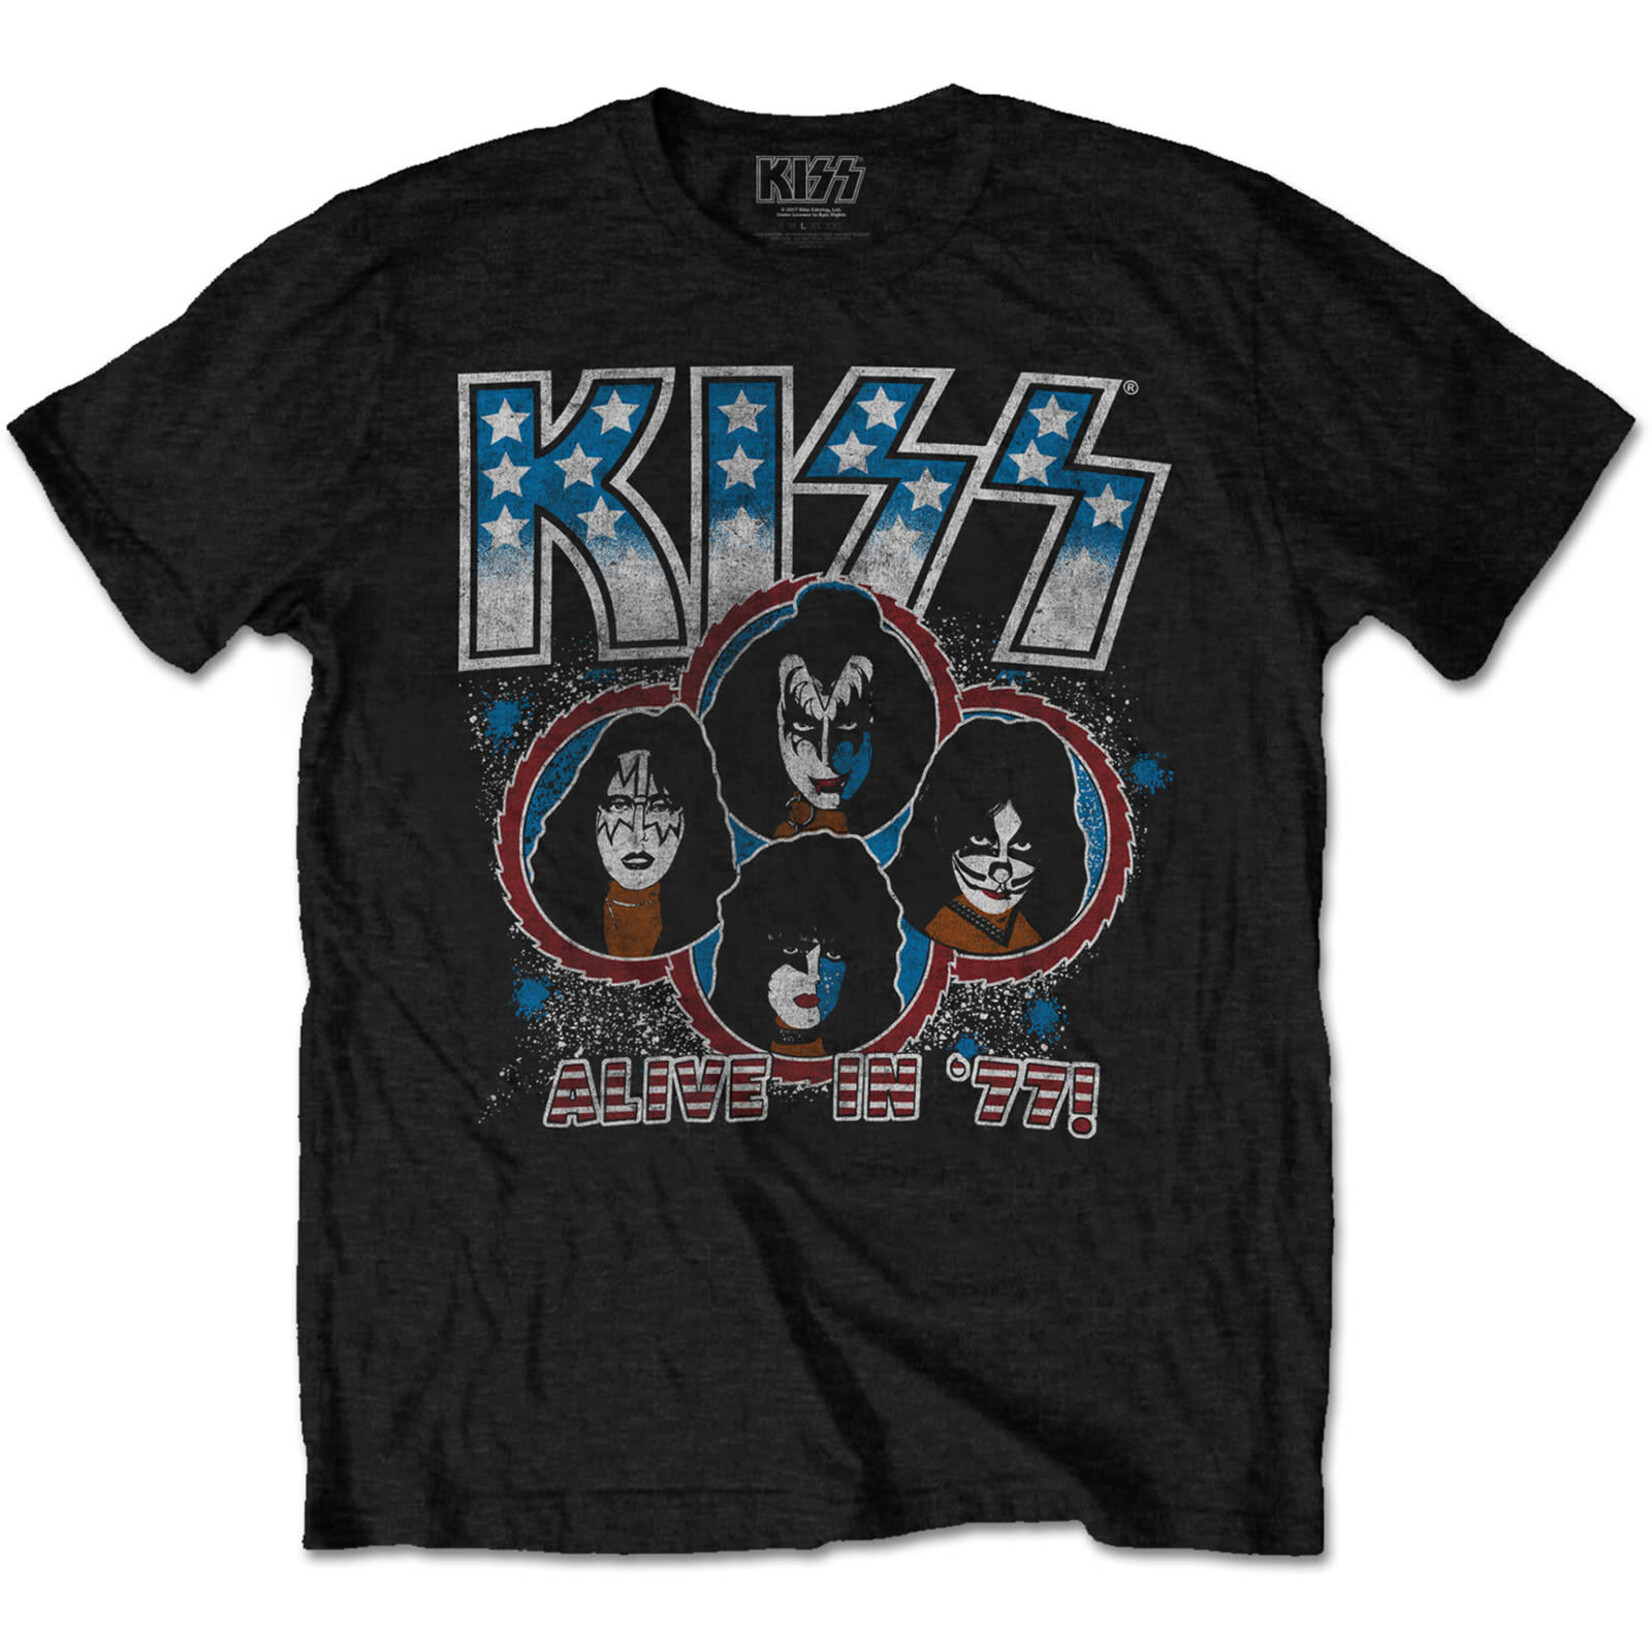 Kiss - Alive In '77